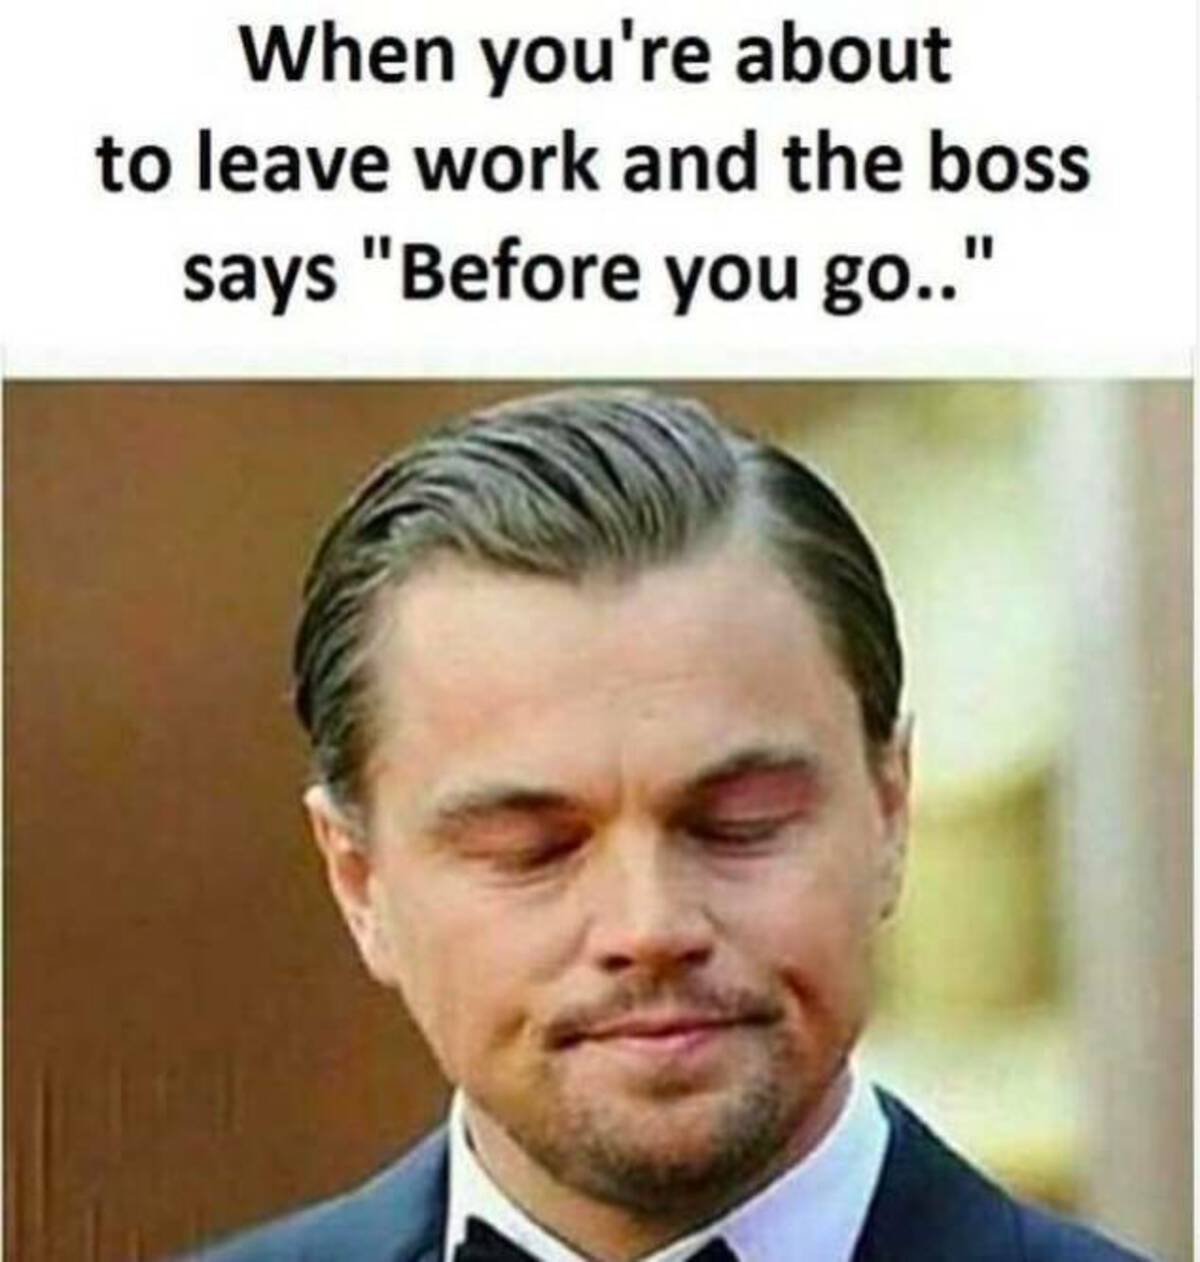 photo caption - When you're about to leave work and the boss says "Before you go.."